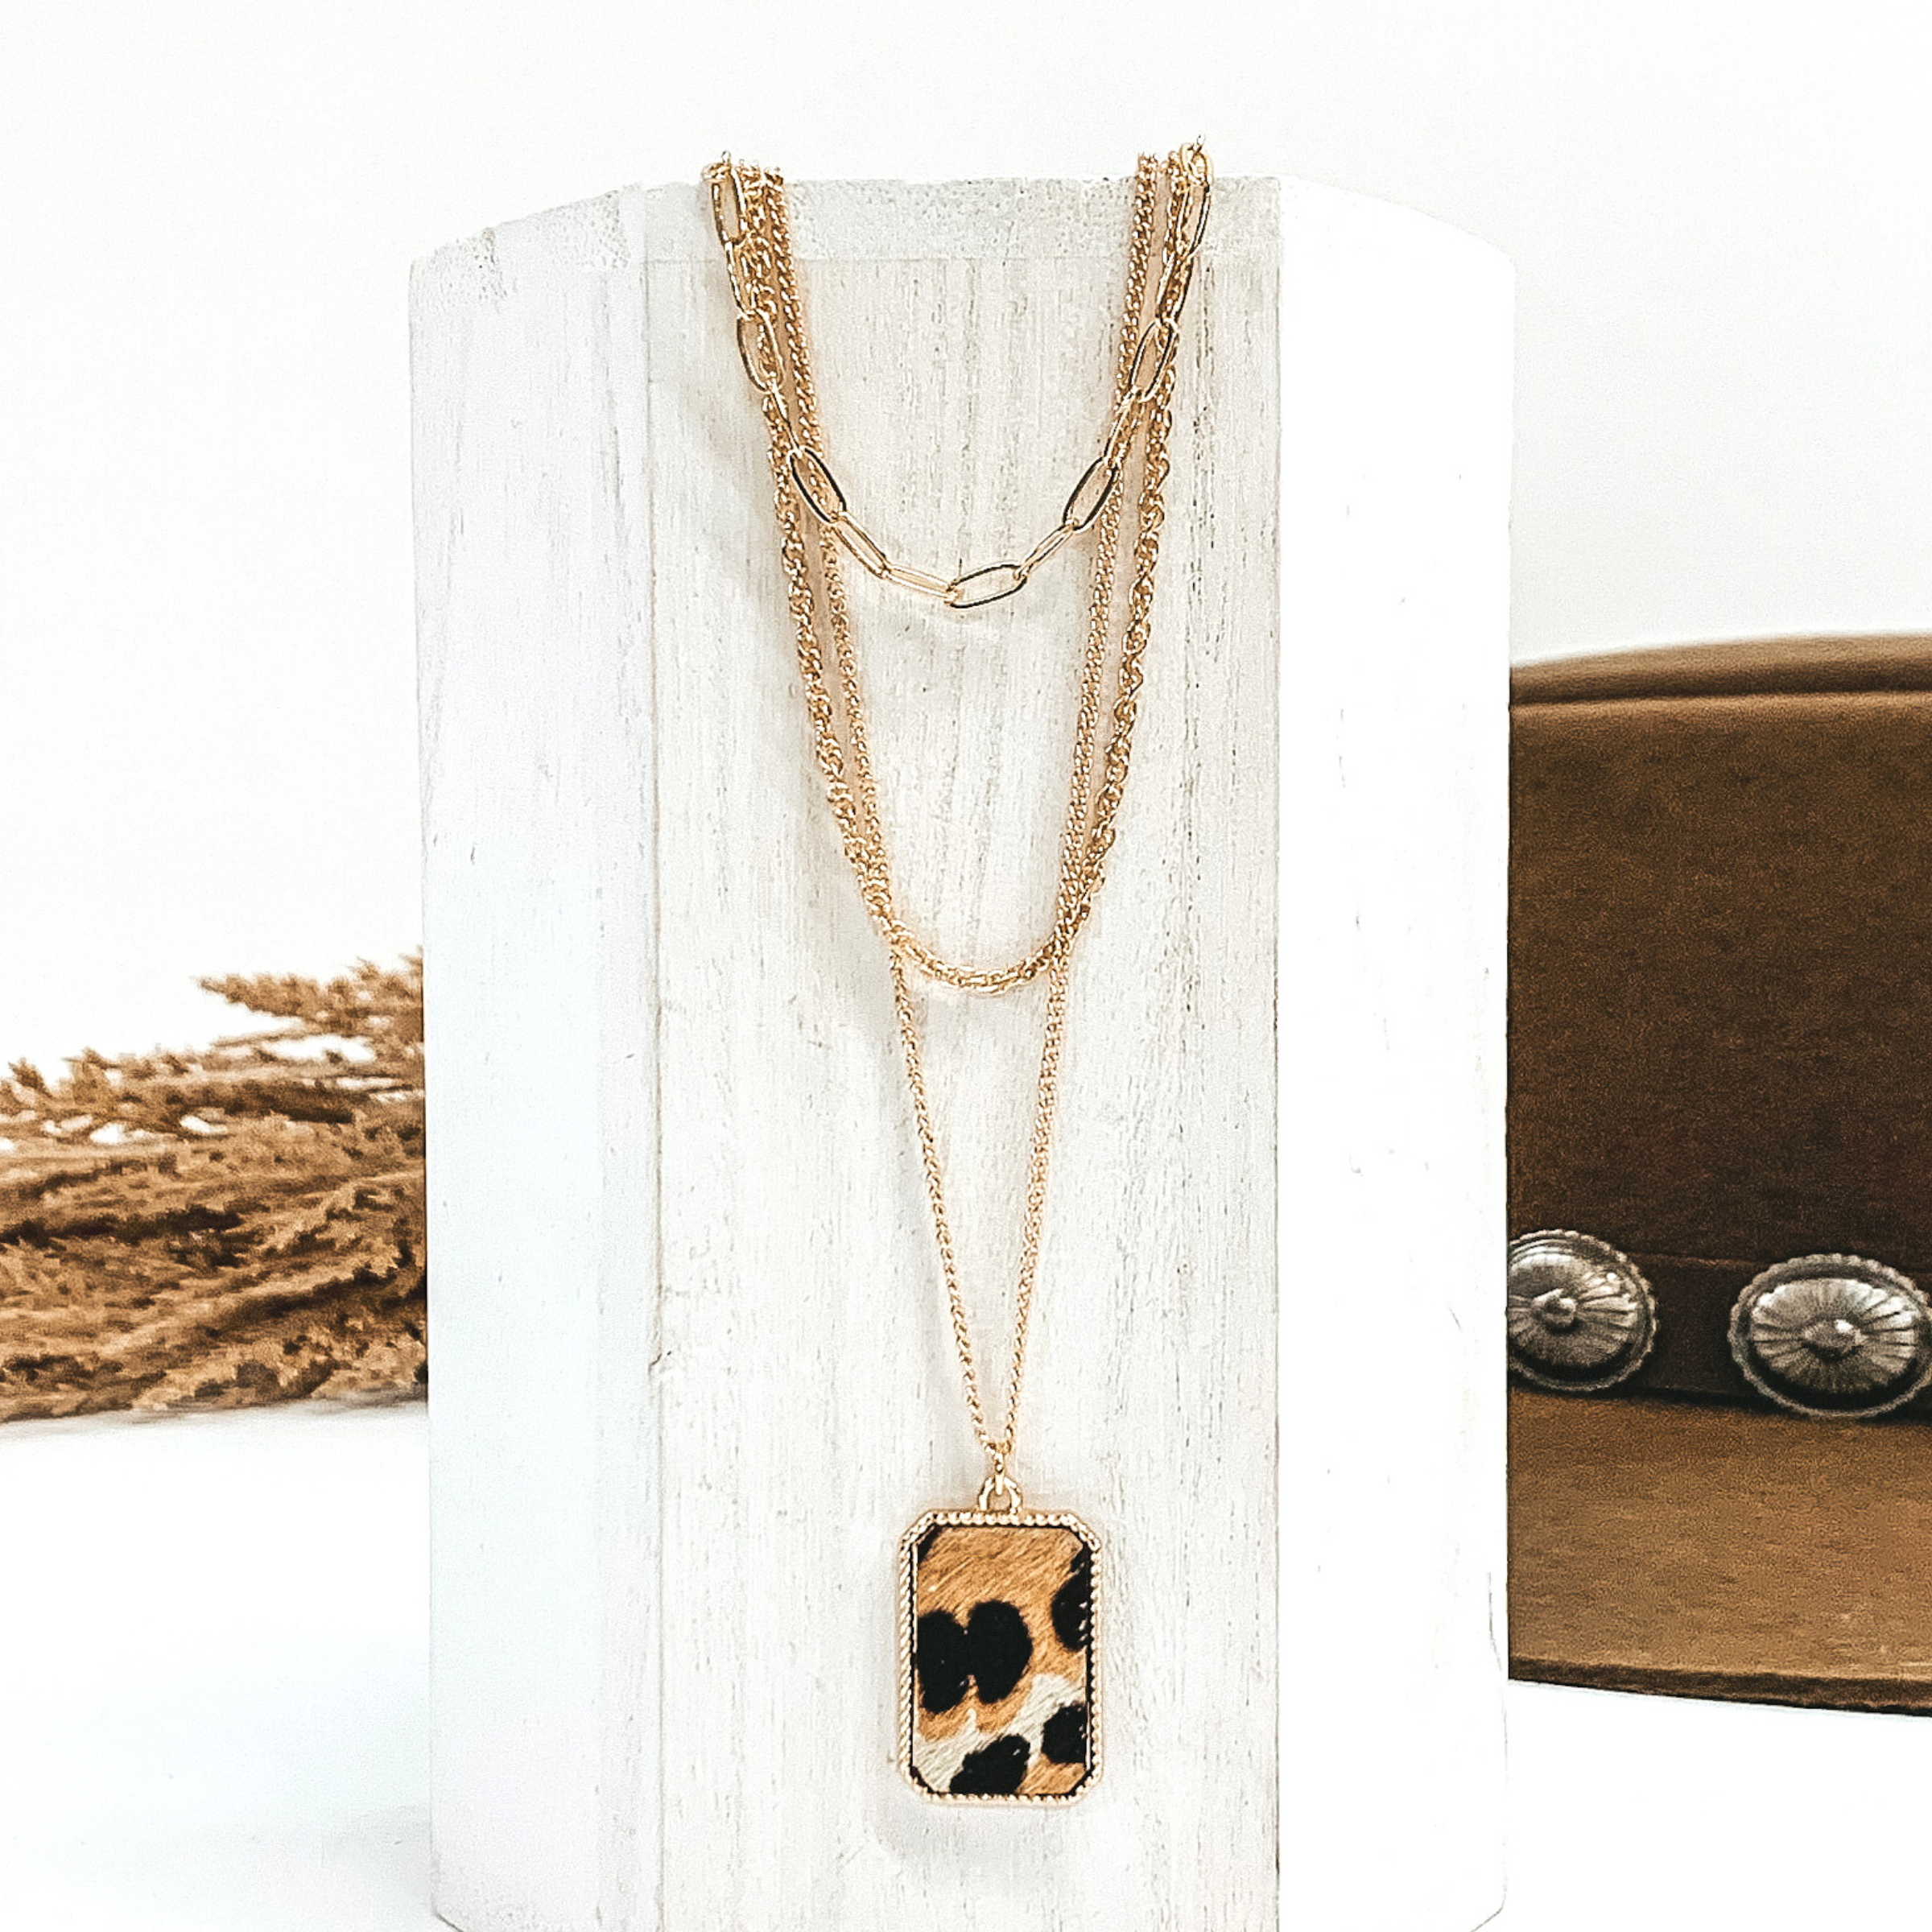 There are three different gold chains at different lengths laying on a white piece of wood. The longest chain has gold rectangle pendant with a ivory, tan, and black animal print inlay. This is all pictured on a white background with a brown hat and brown floral in the background.